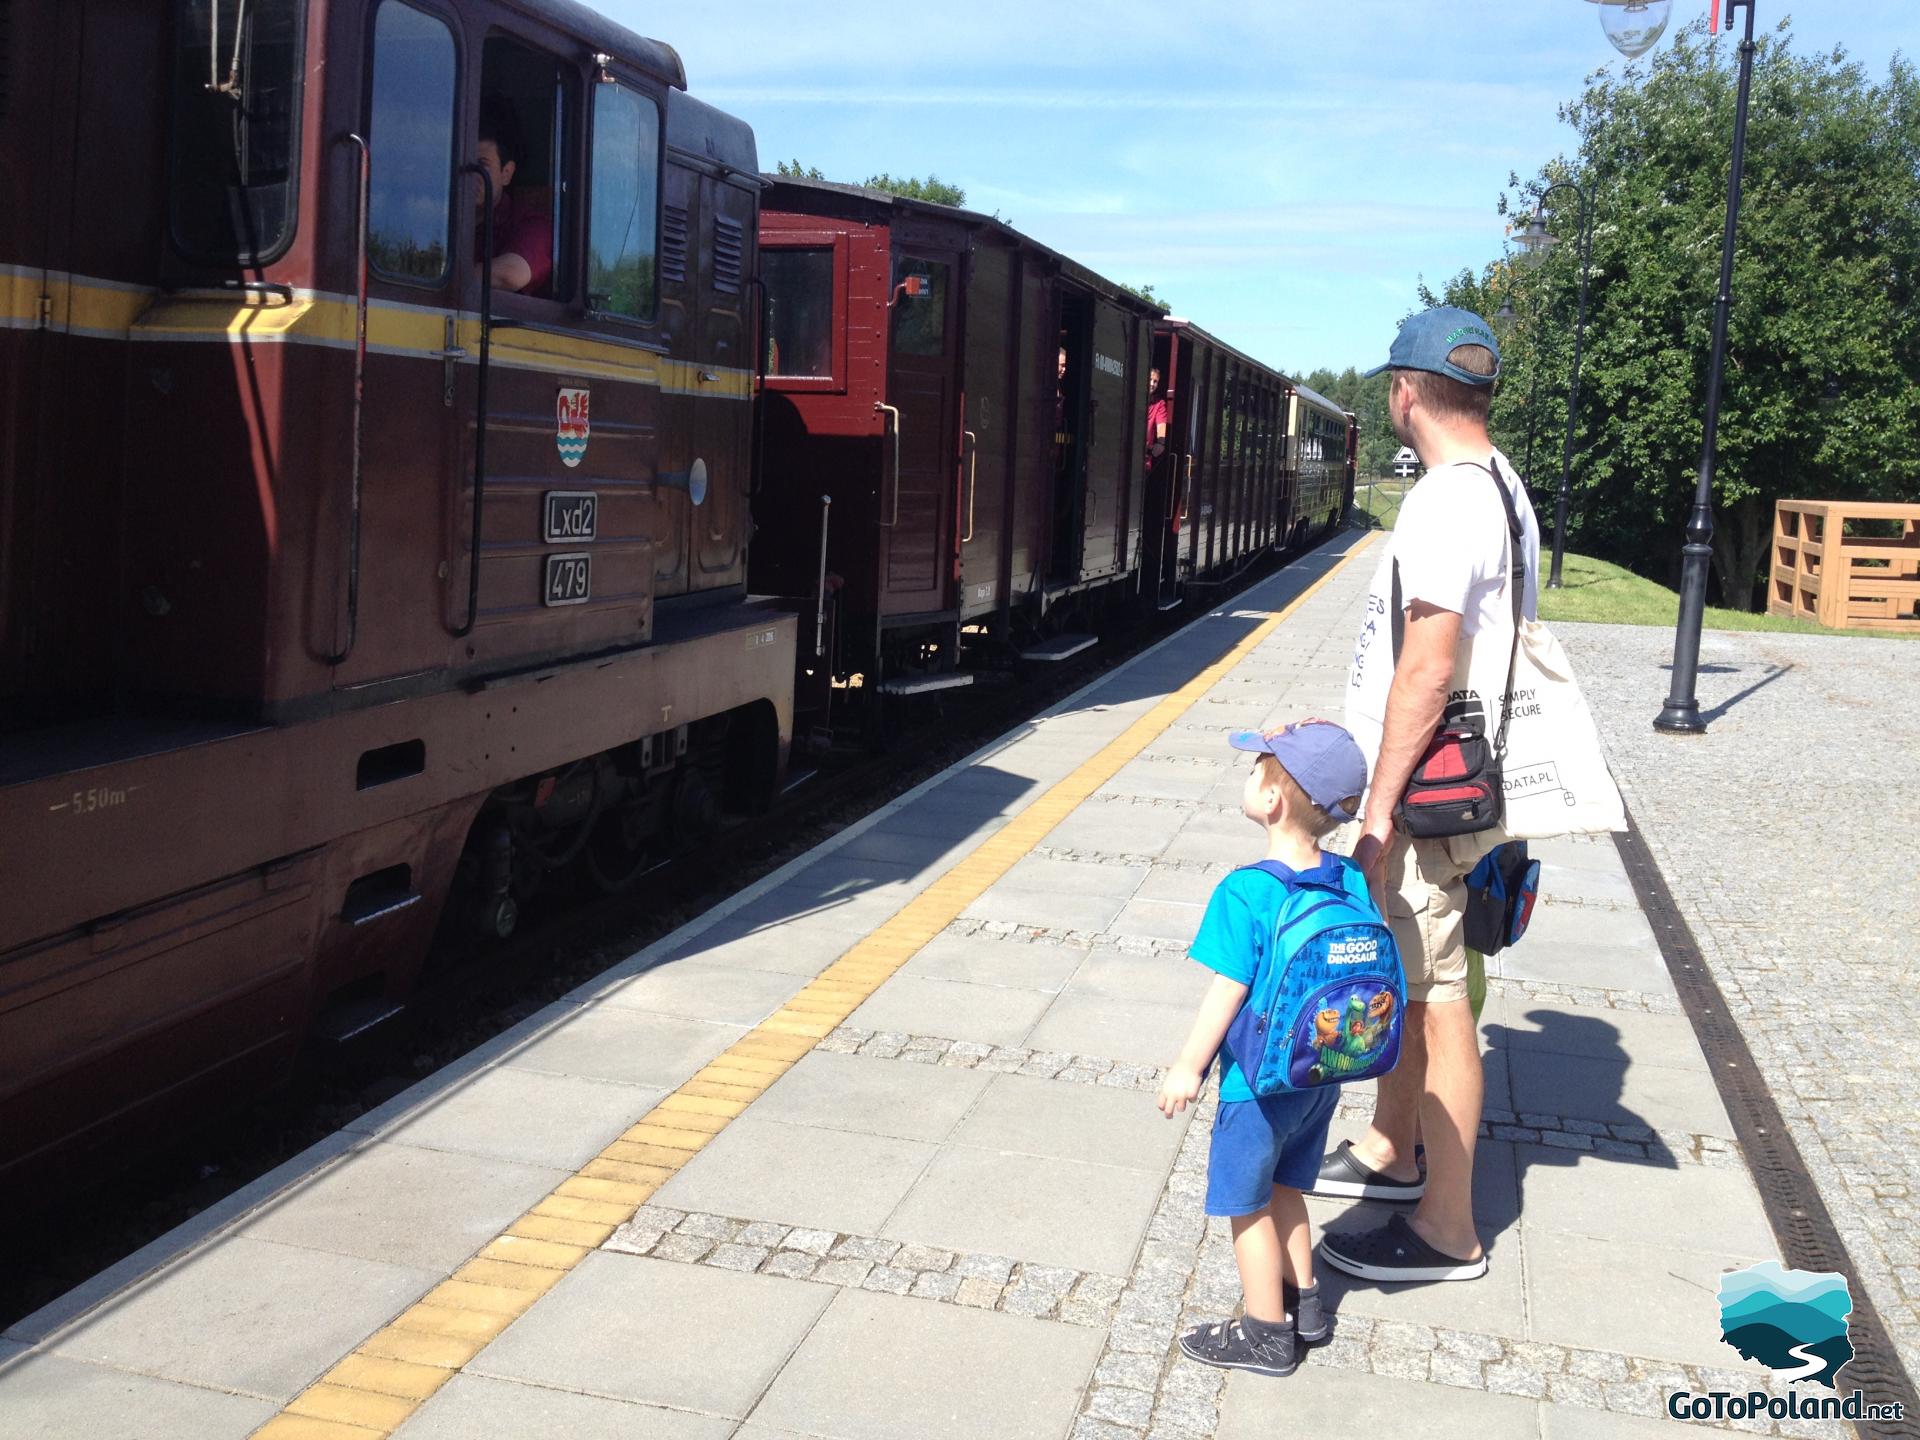 Two boys and a man watching a train arriving at the station